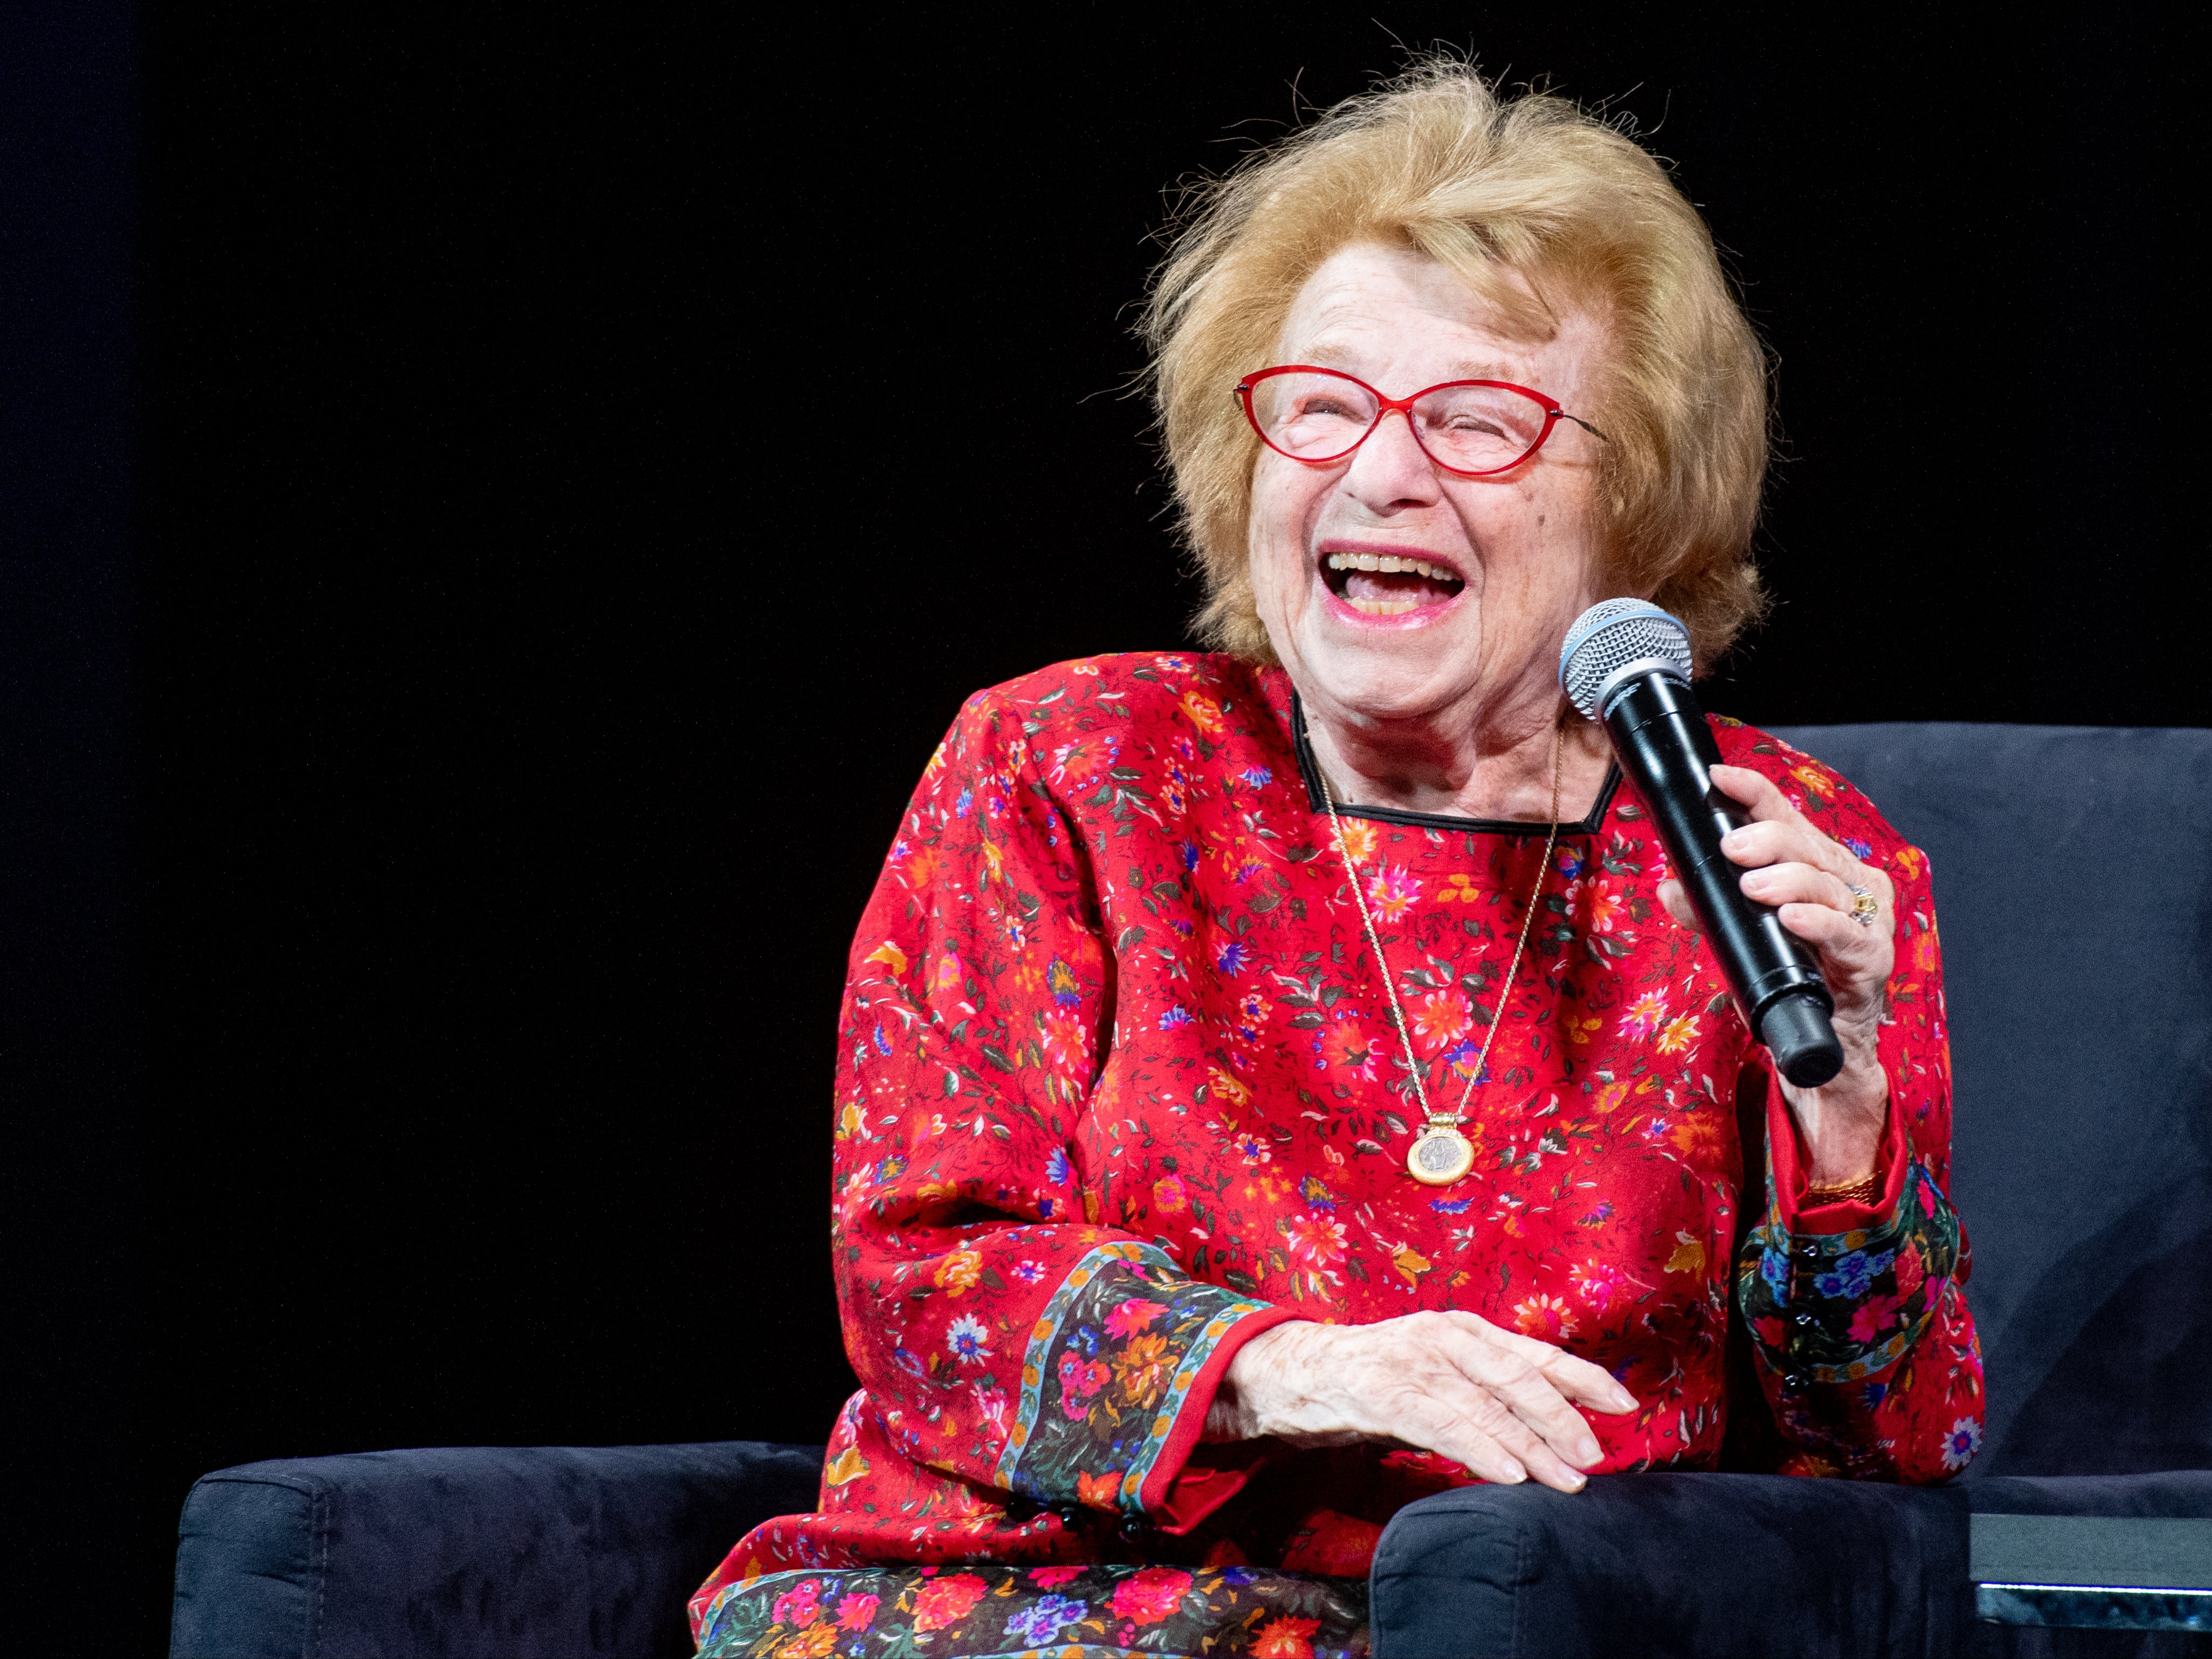 Dr Ruth Westheimer at the Tribeca Film Festival in April 2019